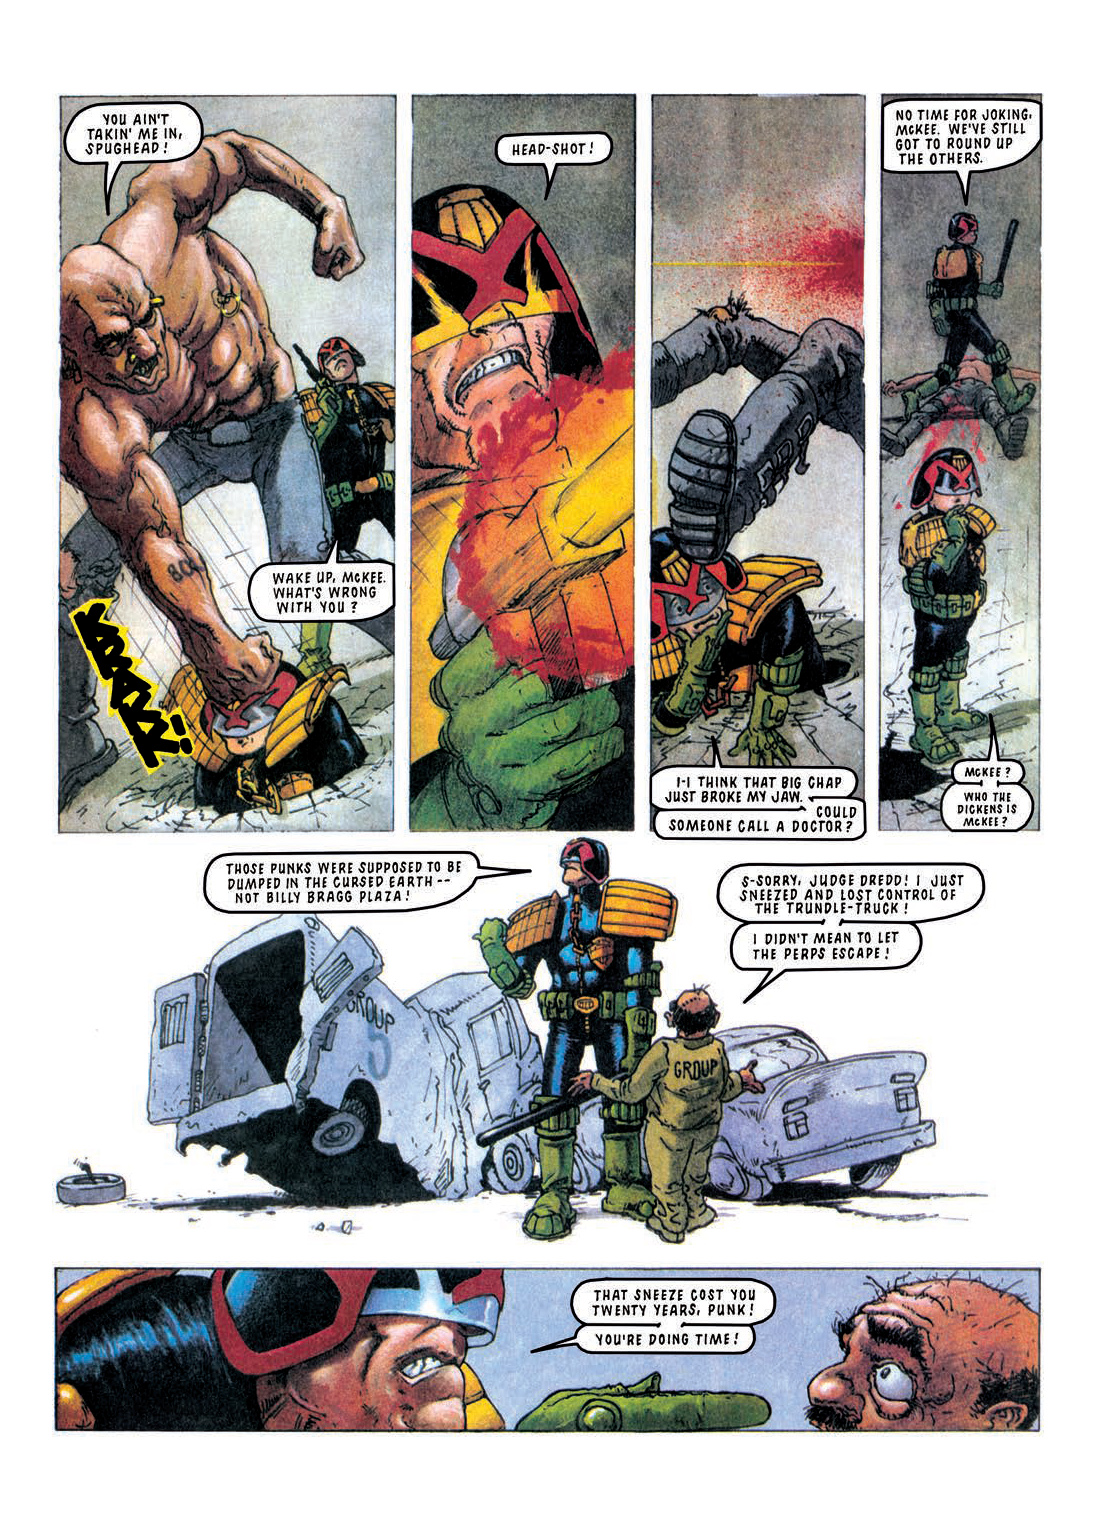 Read online Judge Dredd: The Restricted Files comic -  Issue # TPB 4 - 14